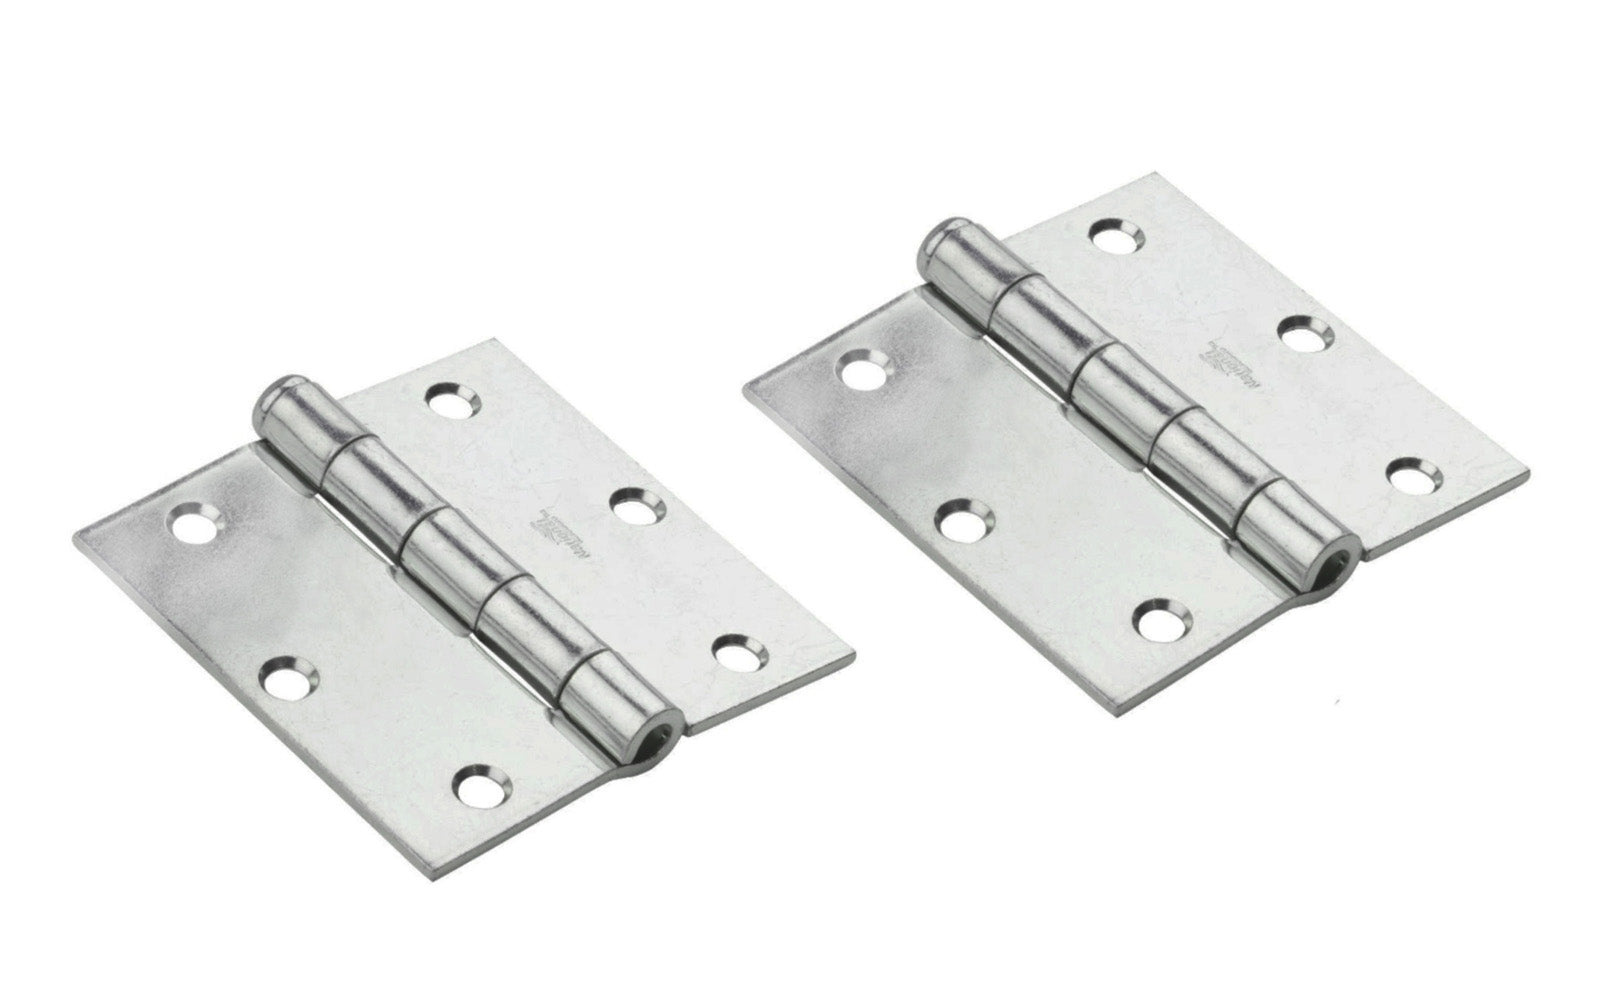 3" Zinc-Plated Steel Door Hinges - 2 Pack. removable pin broad hinge is designed for general utility & industrial applications. Hinges are swaged for mortise installations. Loose pin allows doors to be removed without taking off hinges. Sold as two hinges in pack.  National Hardware Model No. N195-651. 038613195653